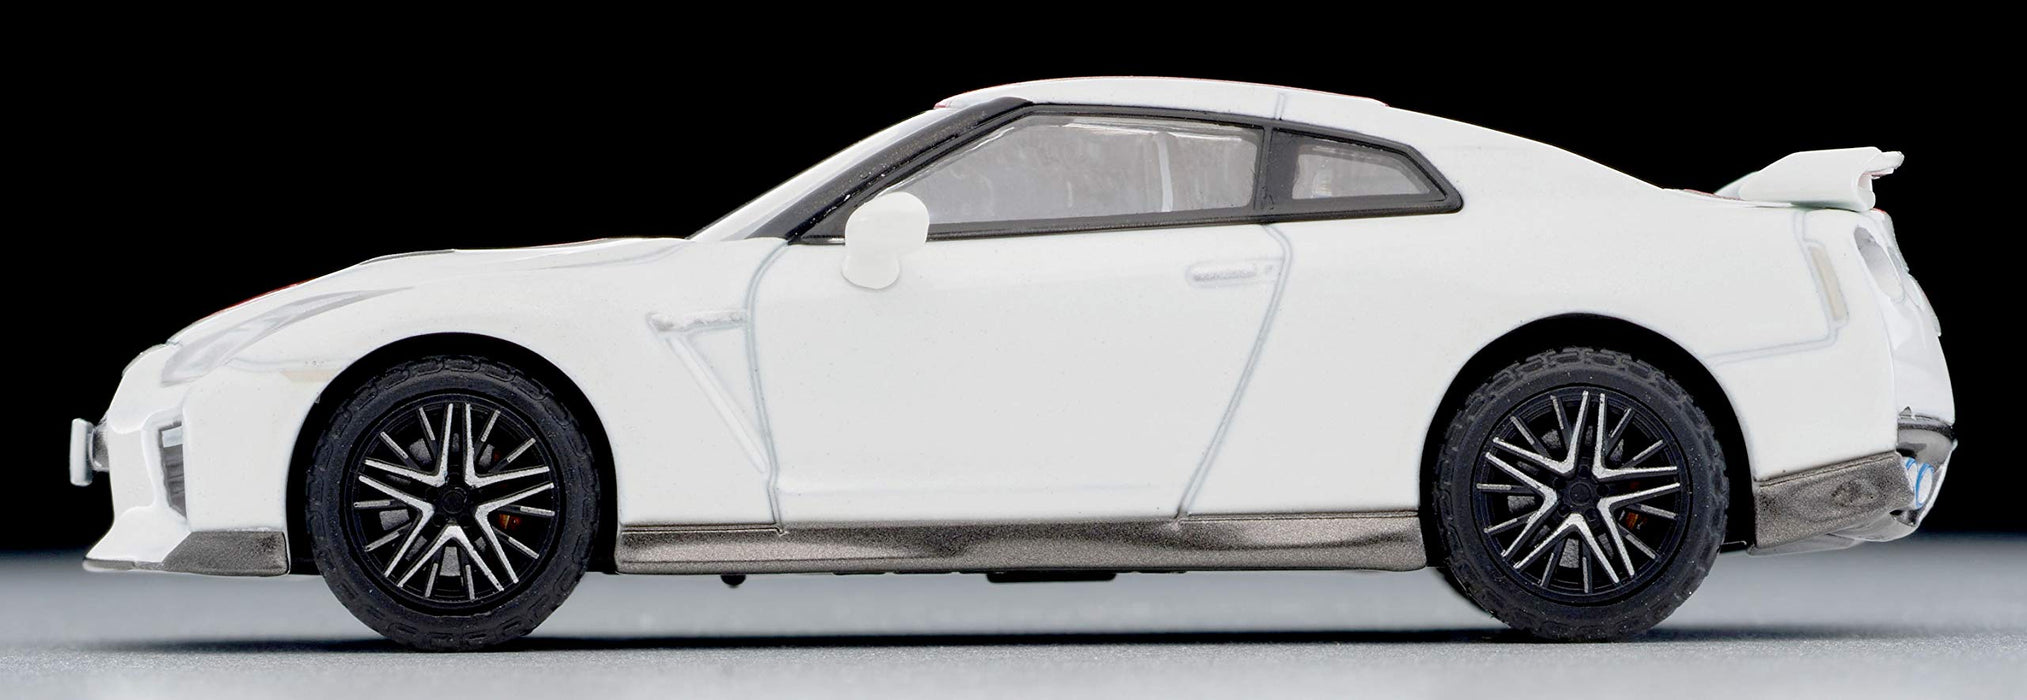 Tomytec Lv-N200c Tomica Limited Vintage Neo Nissan Gt-R 50th Anniversary White 1/64 Scale Cars